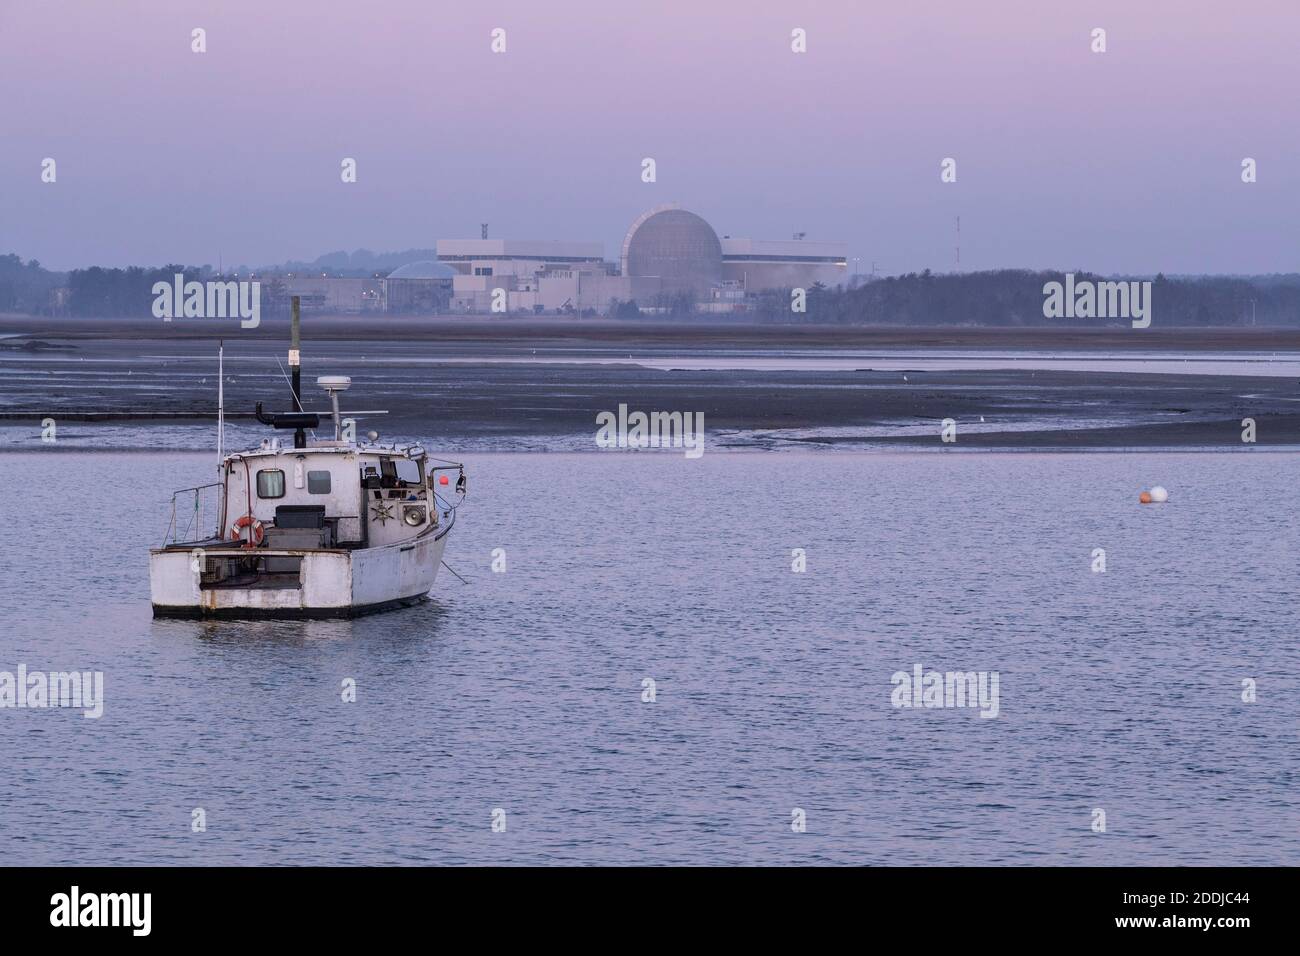 Seabrook is known for it's summer crowds, fishing, restaurants and boats. Also their Nuclear Power Station in the background. Summer is great here! Stock Photo